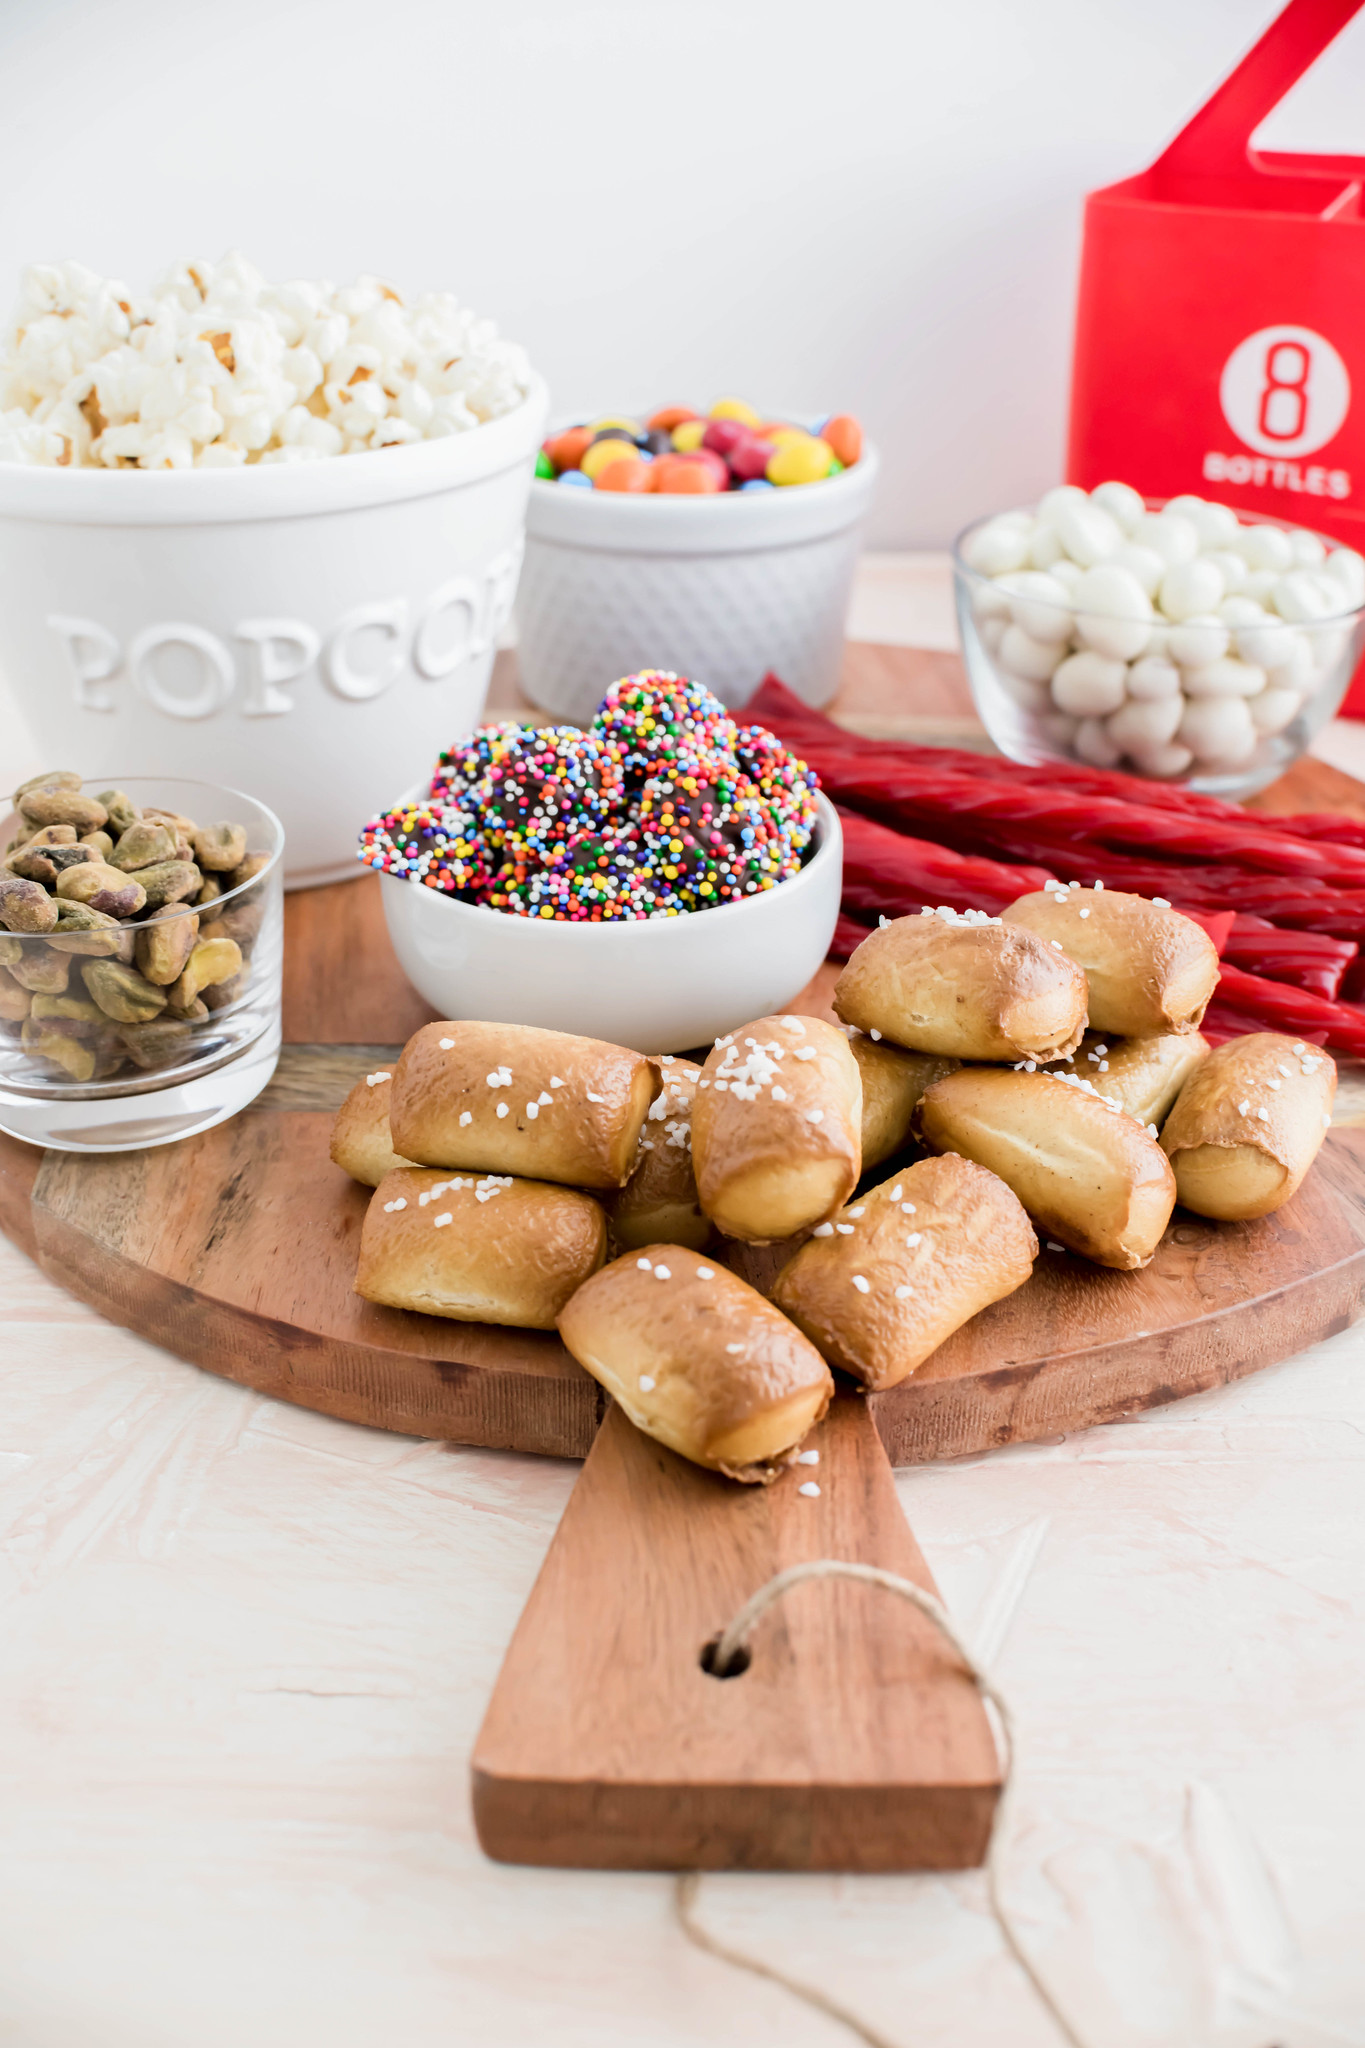 Movie night snack board filled with bowls of popcorn, yogurt raisins, M&M's, pistachios and snowcaps. Soft pretzels and twizzlers on the board.